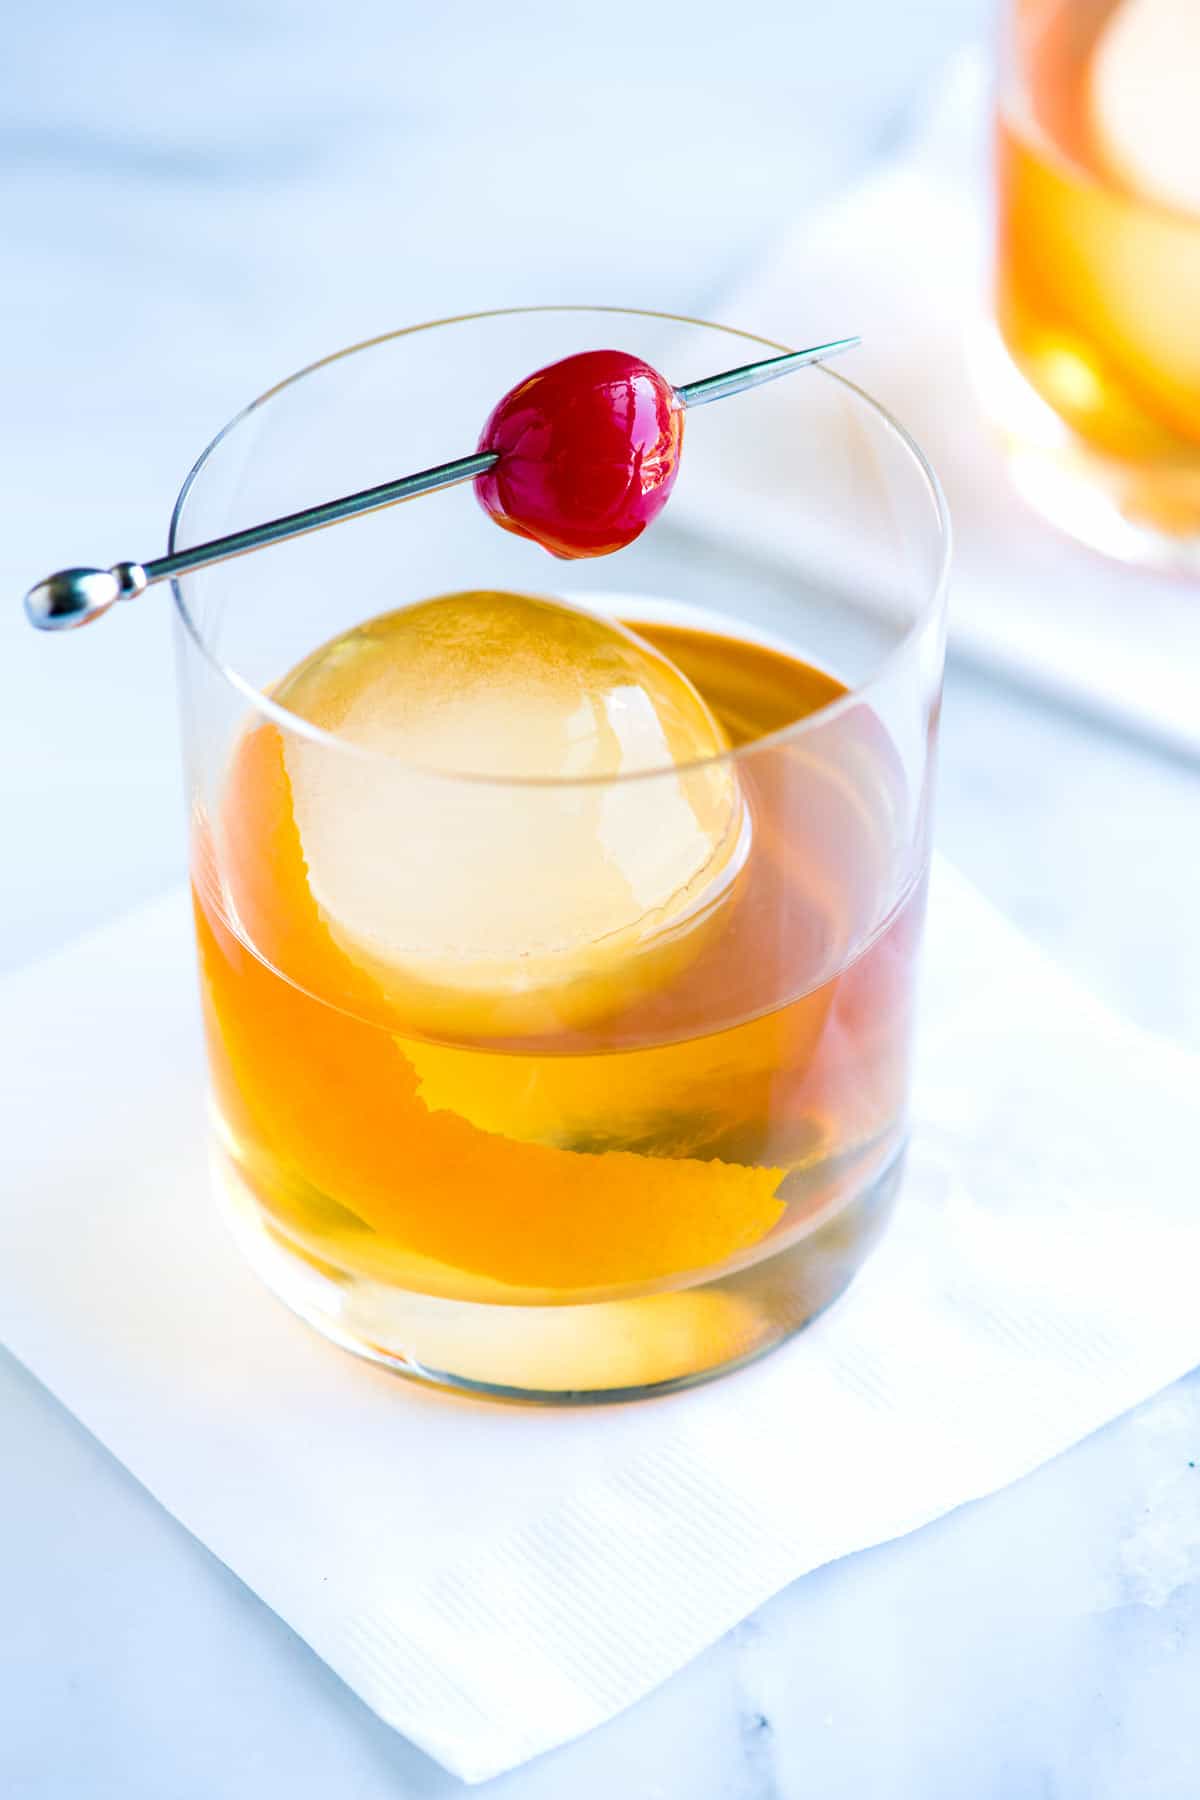 Old Fashioned Drink Recipe, Cocktails